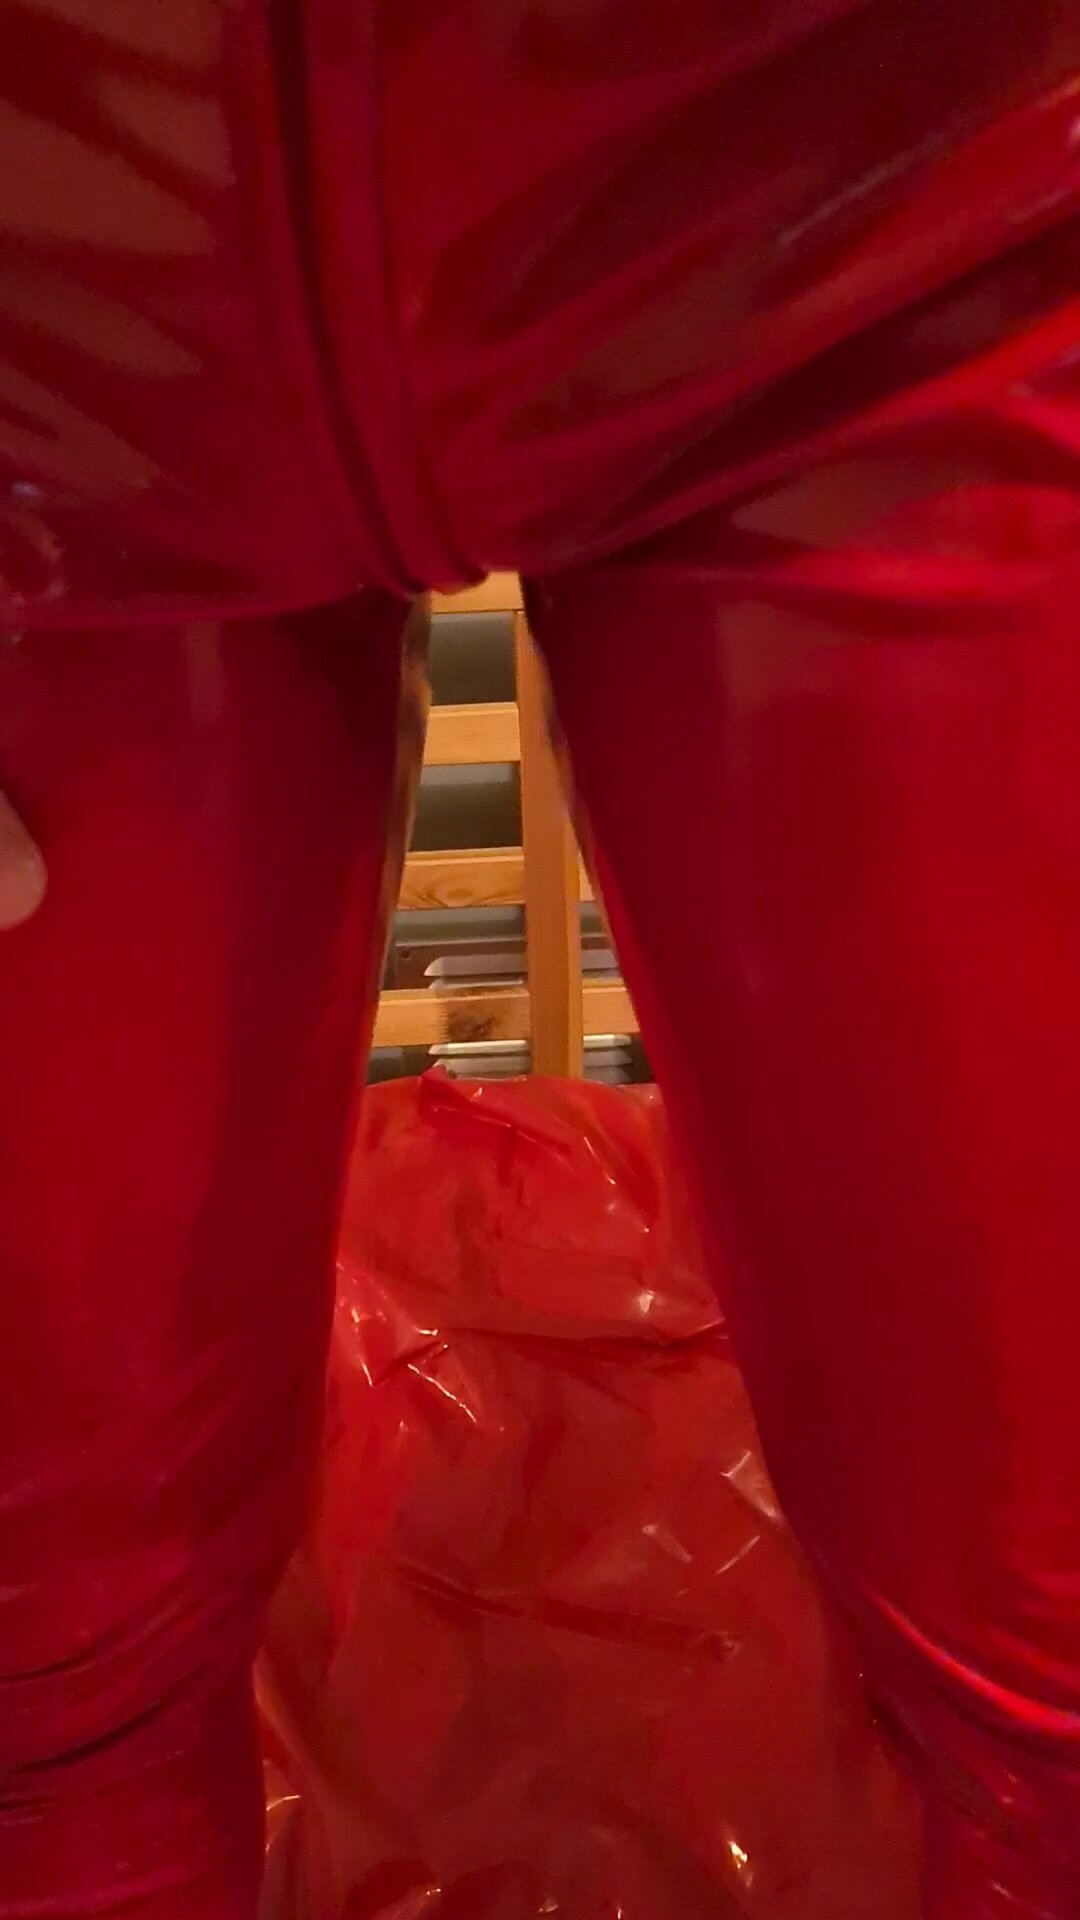 Red PVC catsuit filled with piss on bed